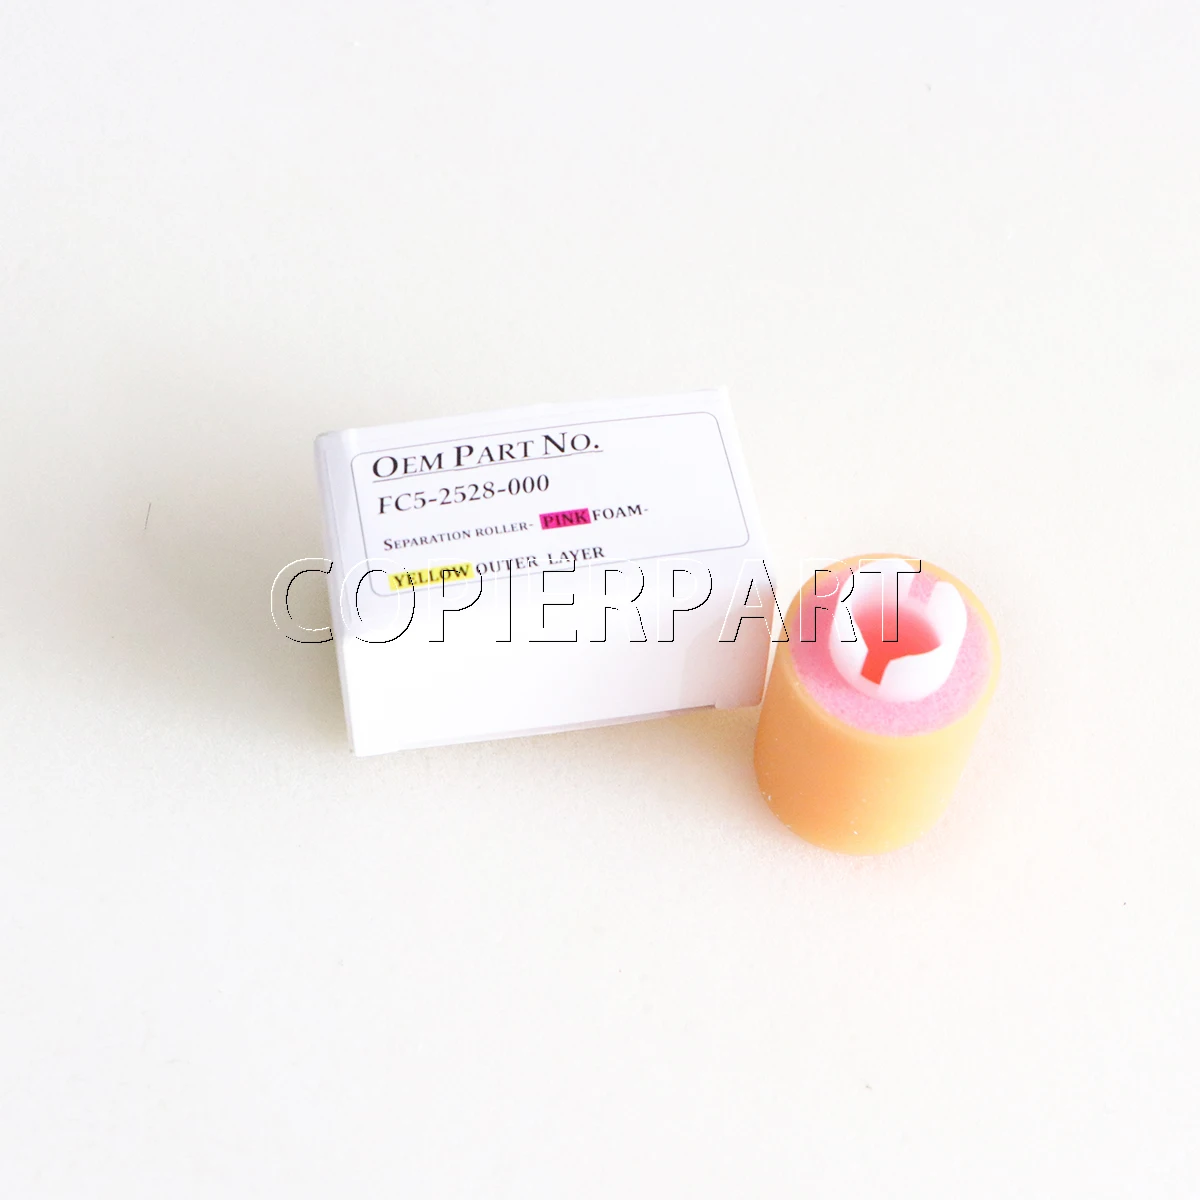 

20pcs FC5-2528-000 Pickup Feed Separation Roller for Canon iR ADV 6555i 6565i 6575i 6555 6565 6575